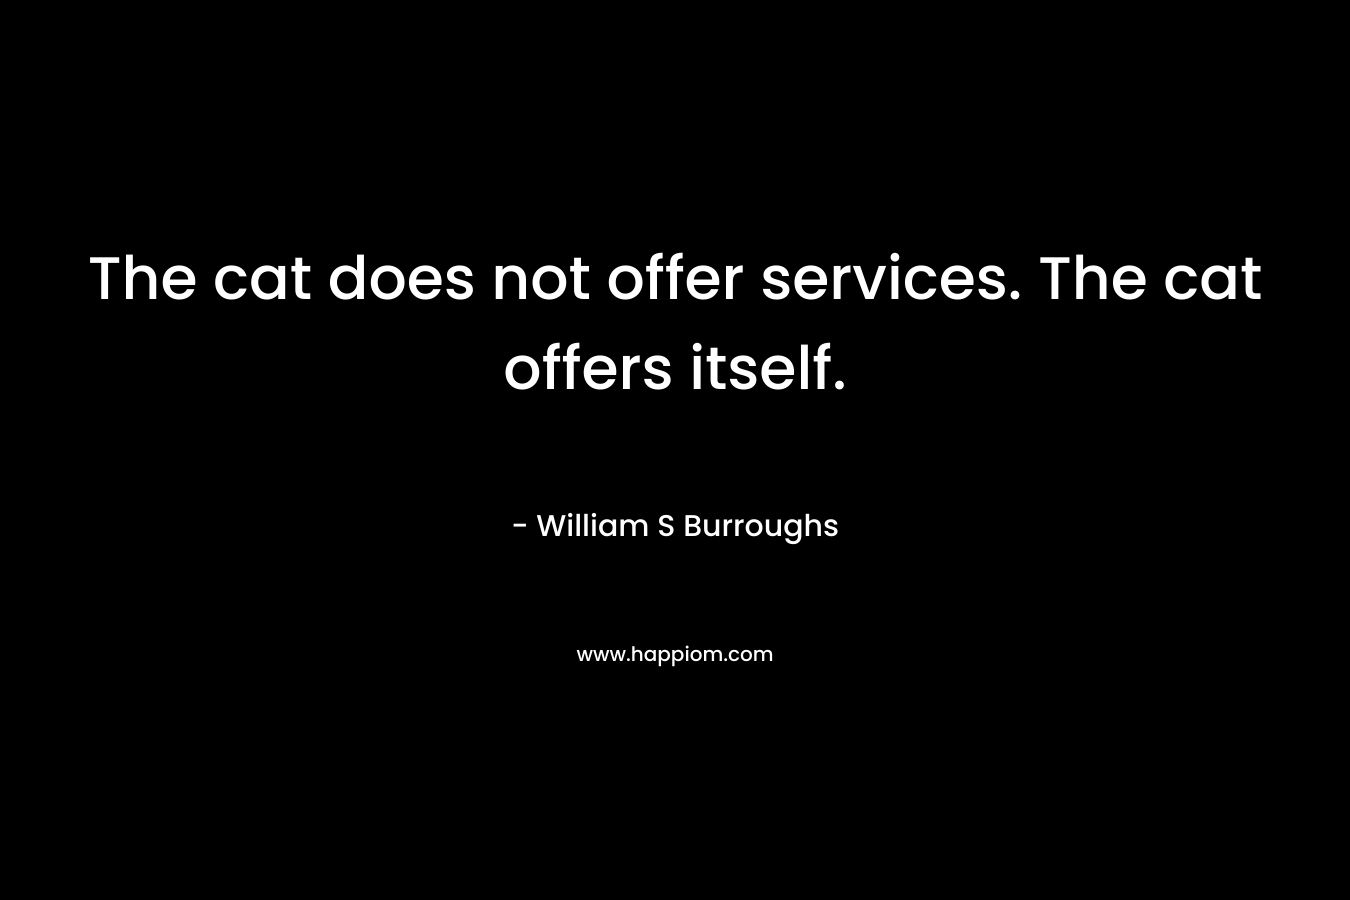 The cat does not offer services. The cat offers itself. – William S Burroughs